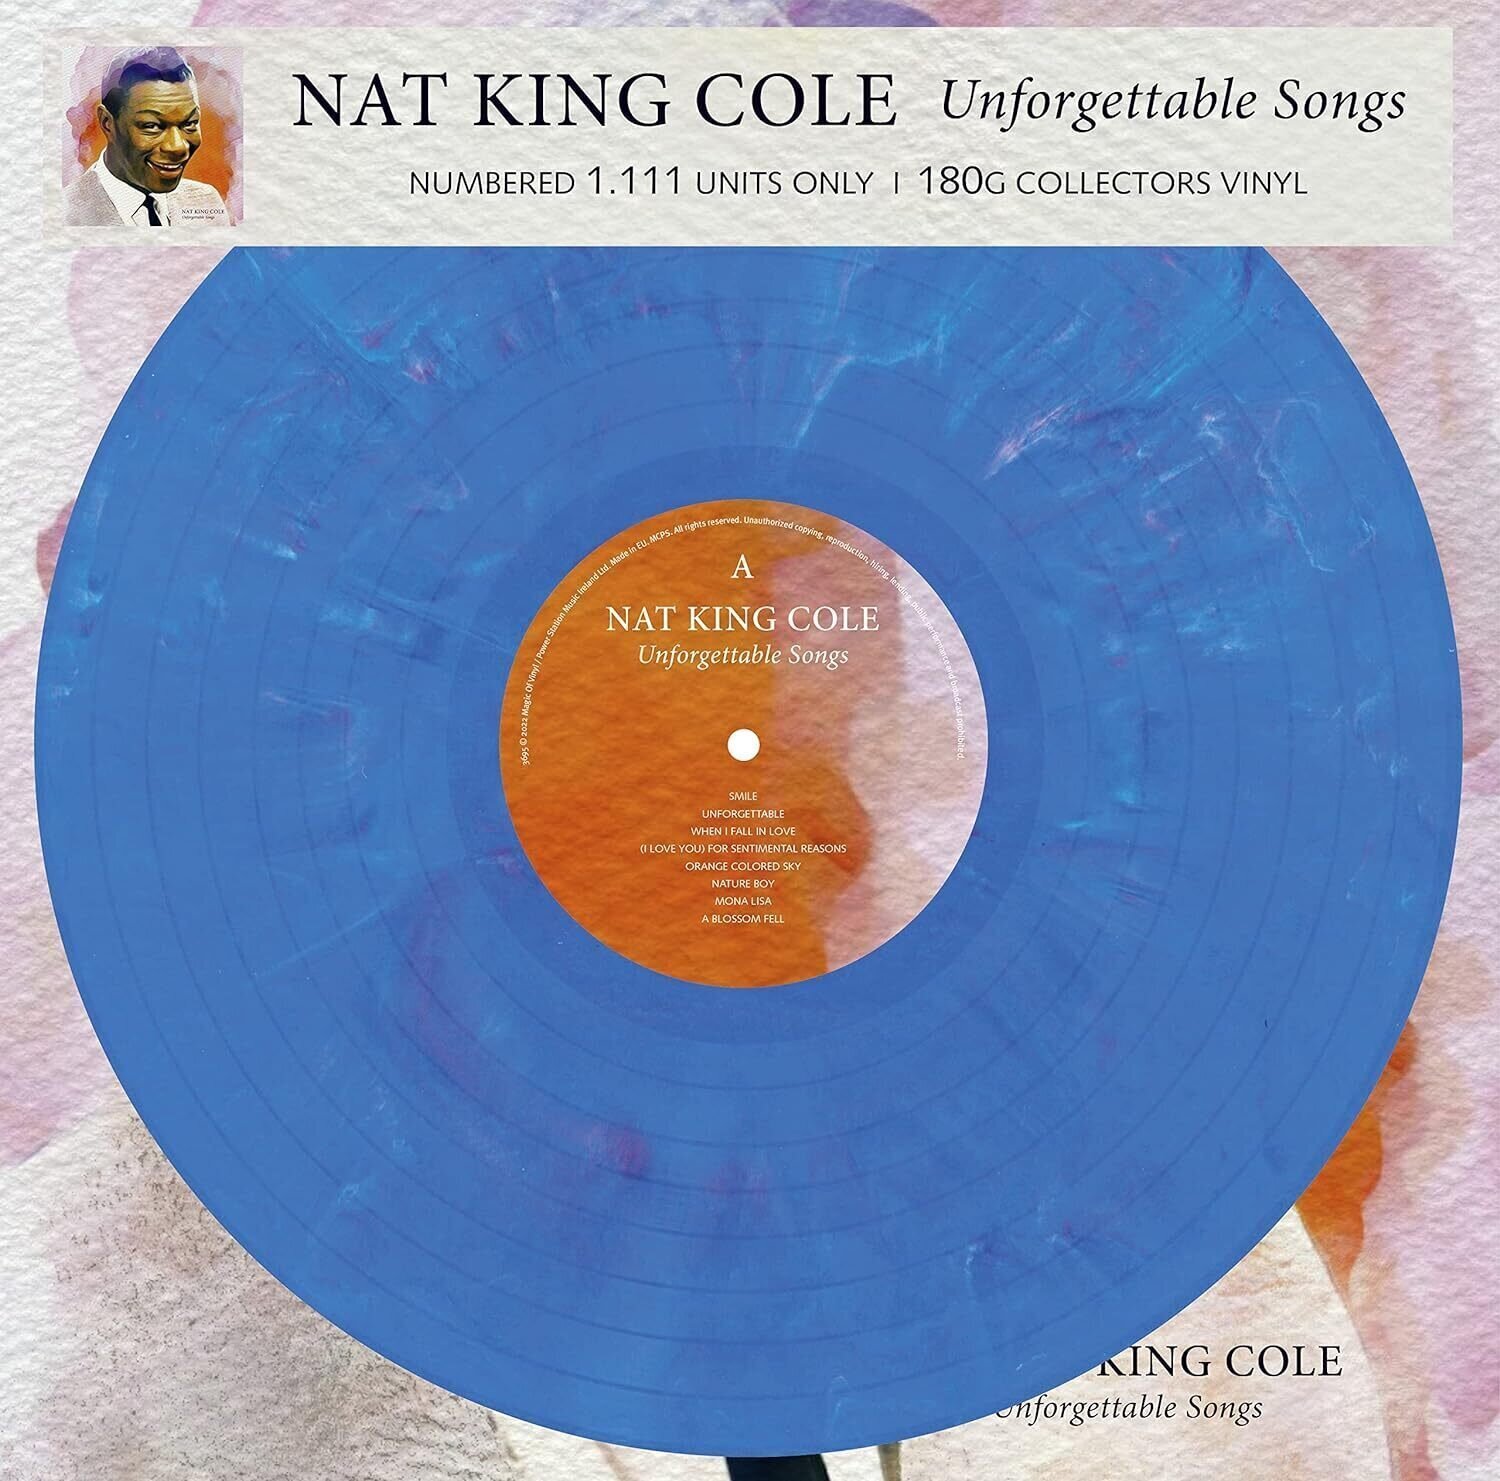 Vinylplade Nat King Cole - Unforgettable Songs (Limited Edition) (Numbered) (Blue Marbled Coloured) (LP)